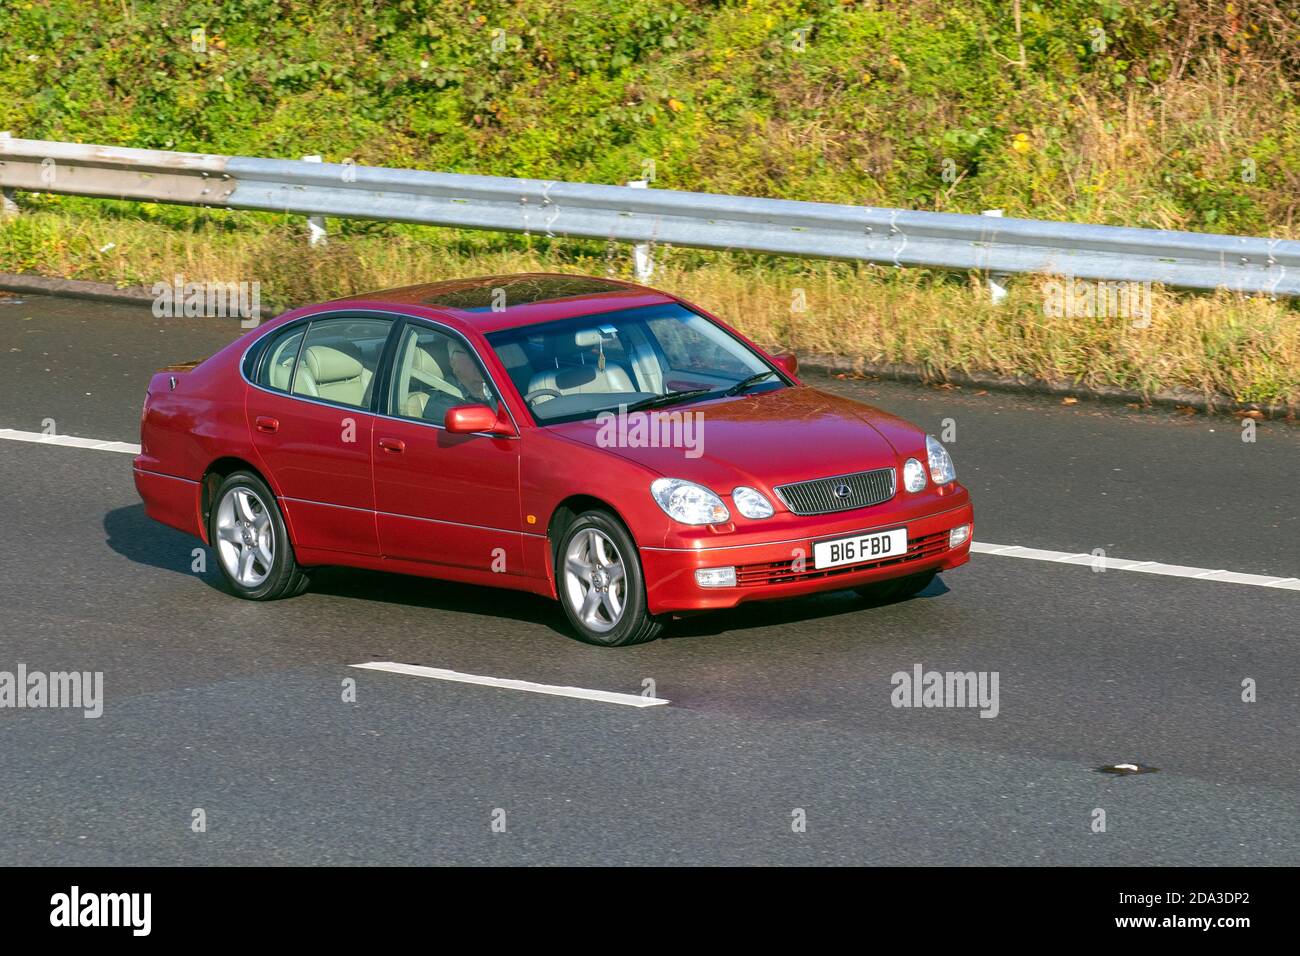 1999 90s red Lexus Gs300 SE Auto; Vehicular traffic, moving vehicles, cars, vehicle driving on UK roads, motors, motoring on the M6 motorway highway UK road network. Stock Photo